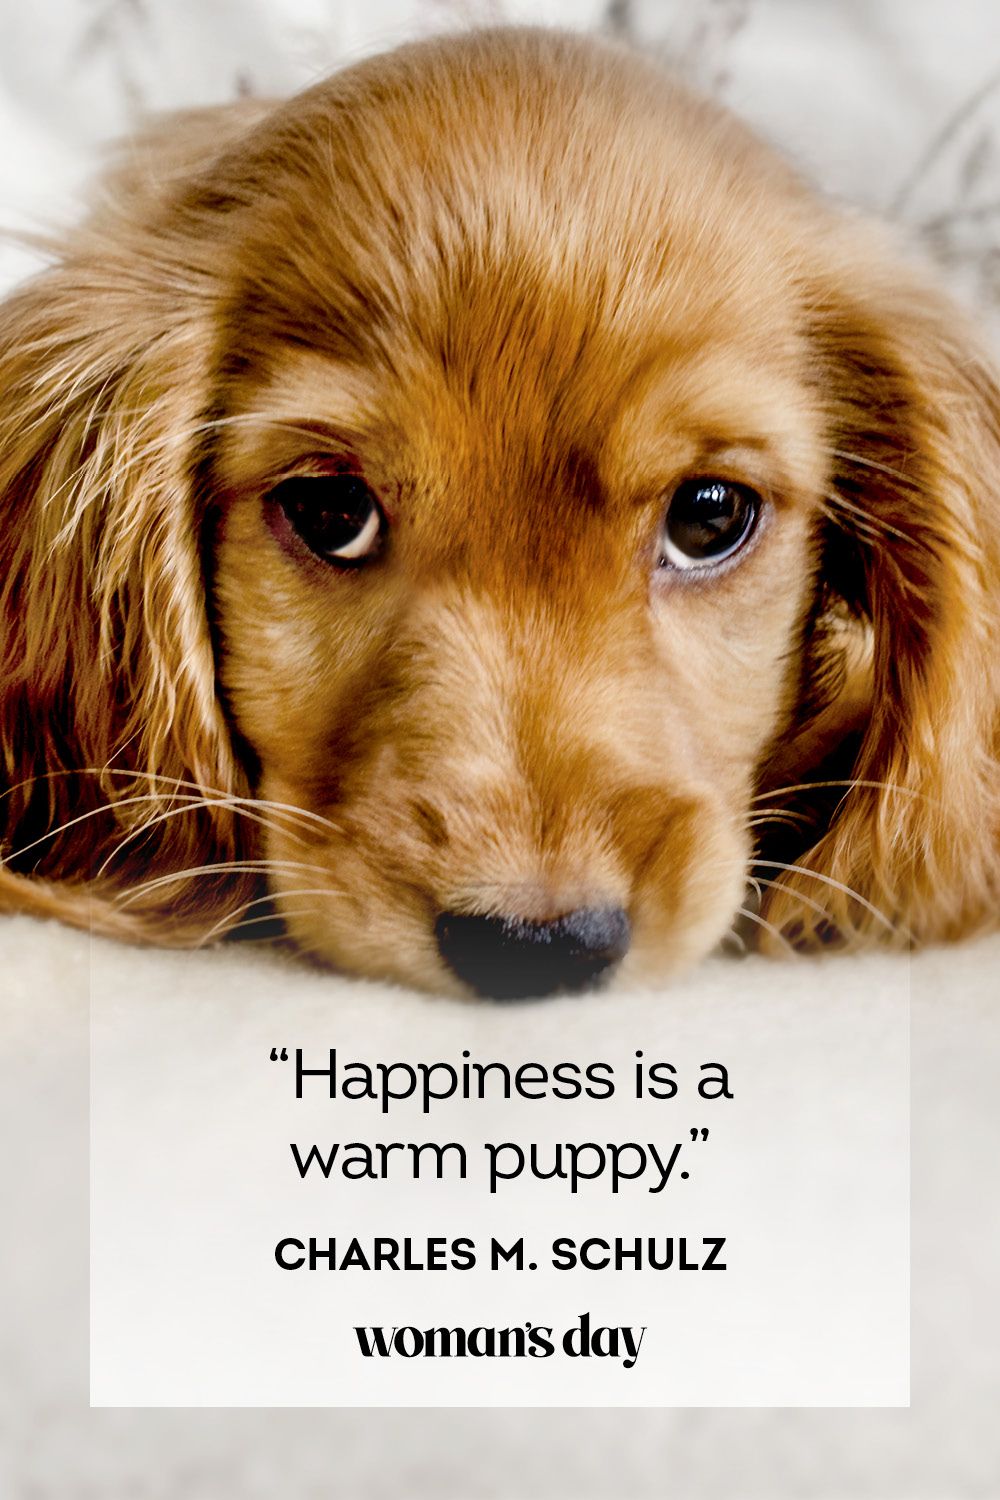 sweet dog quotes